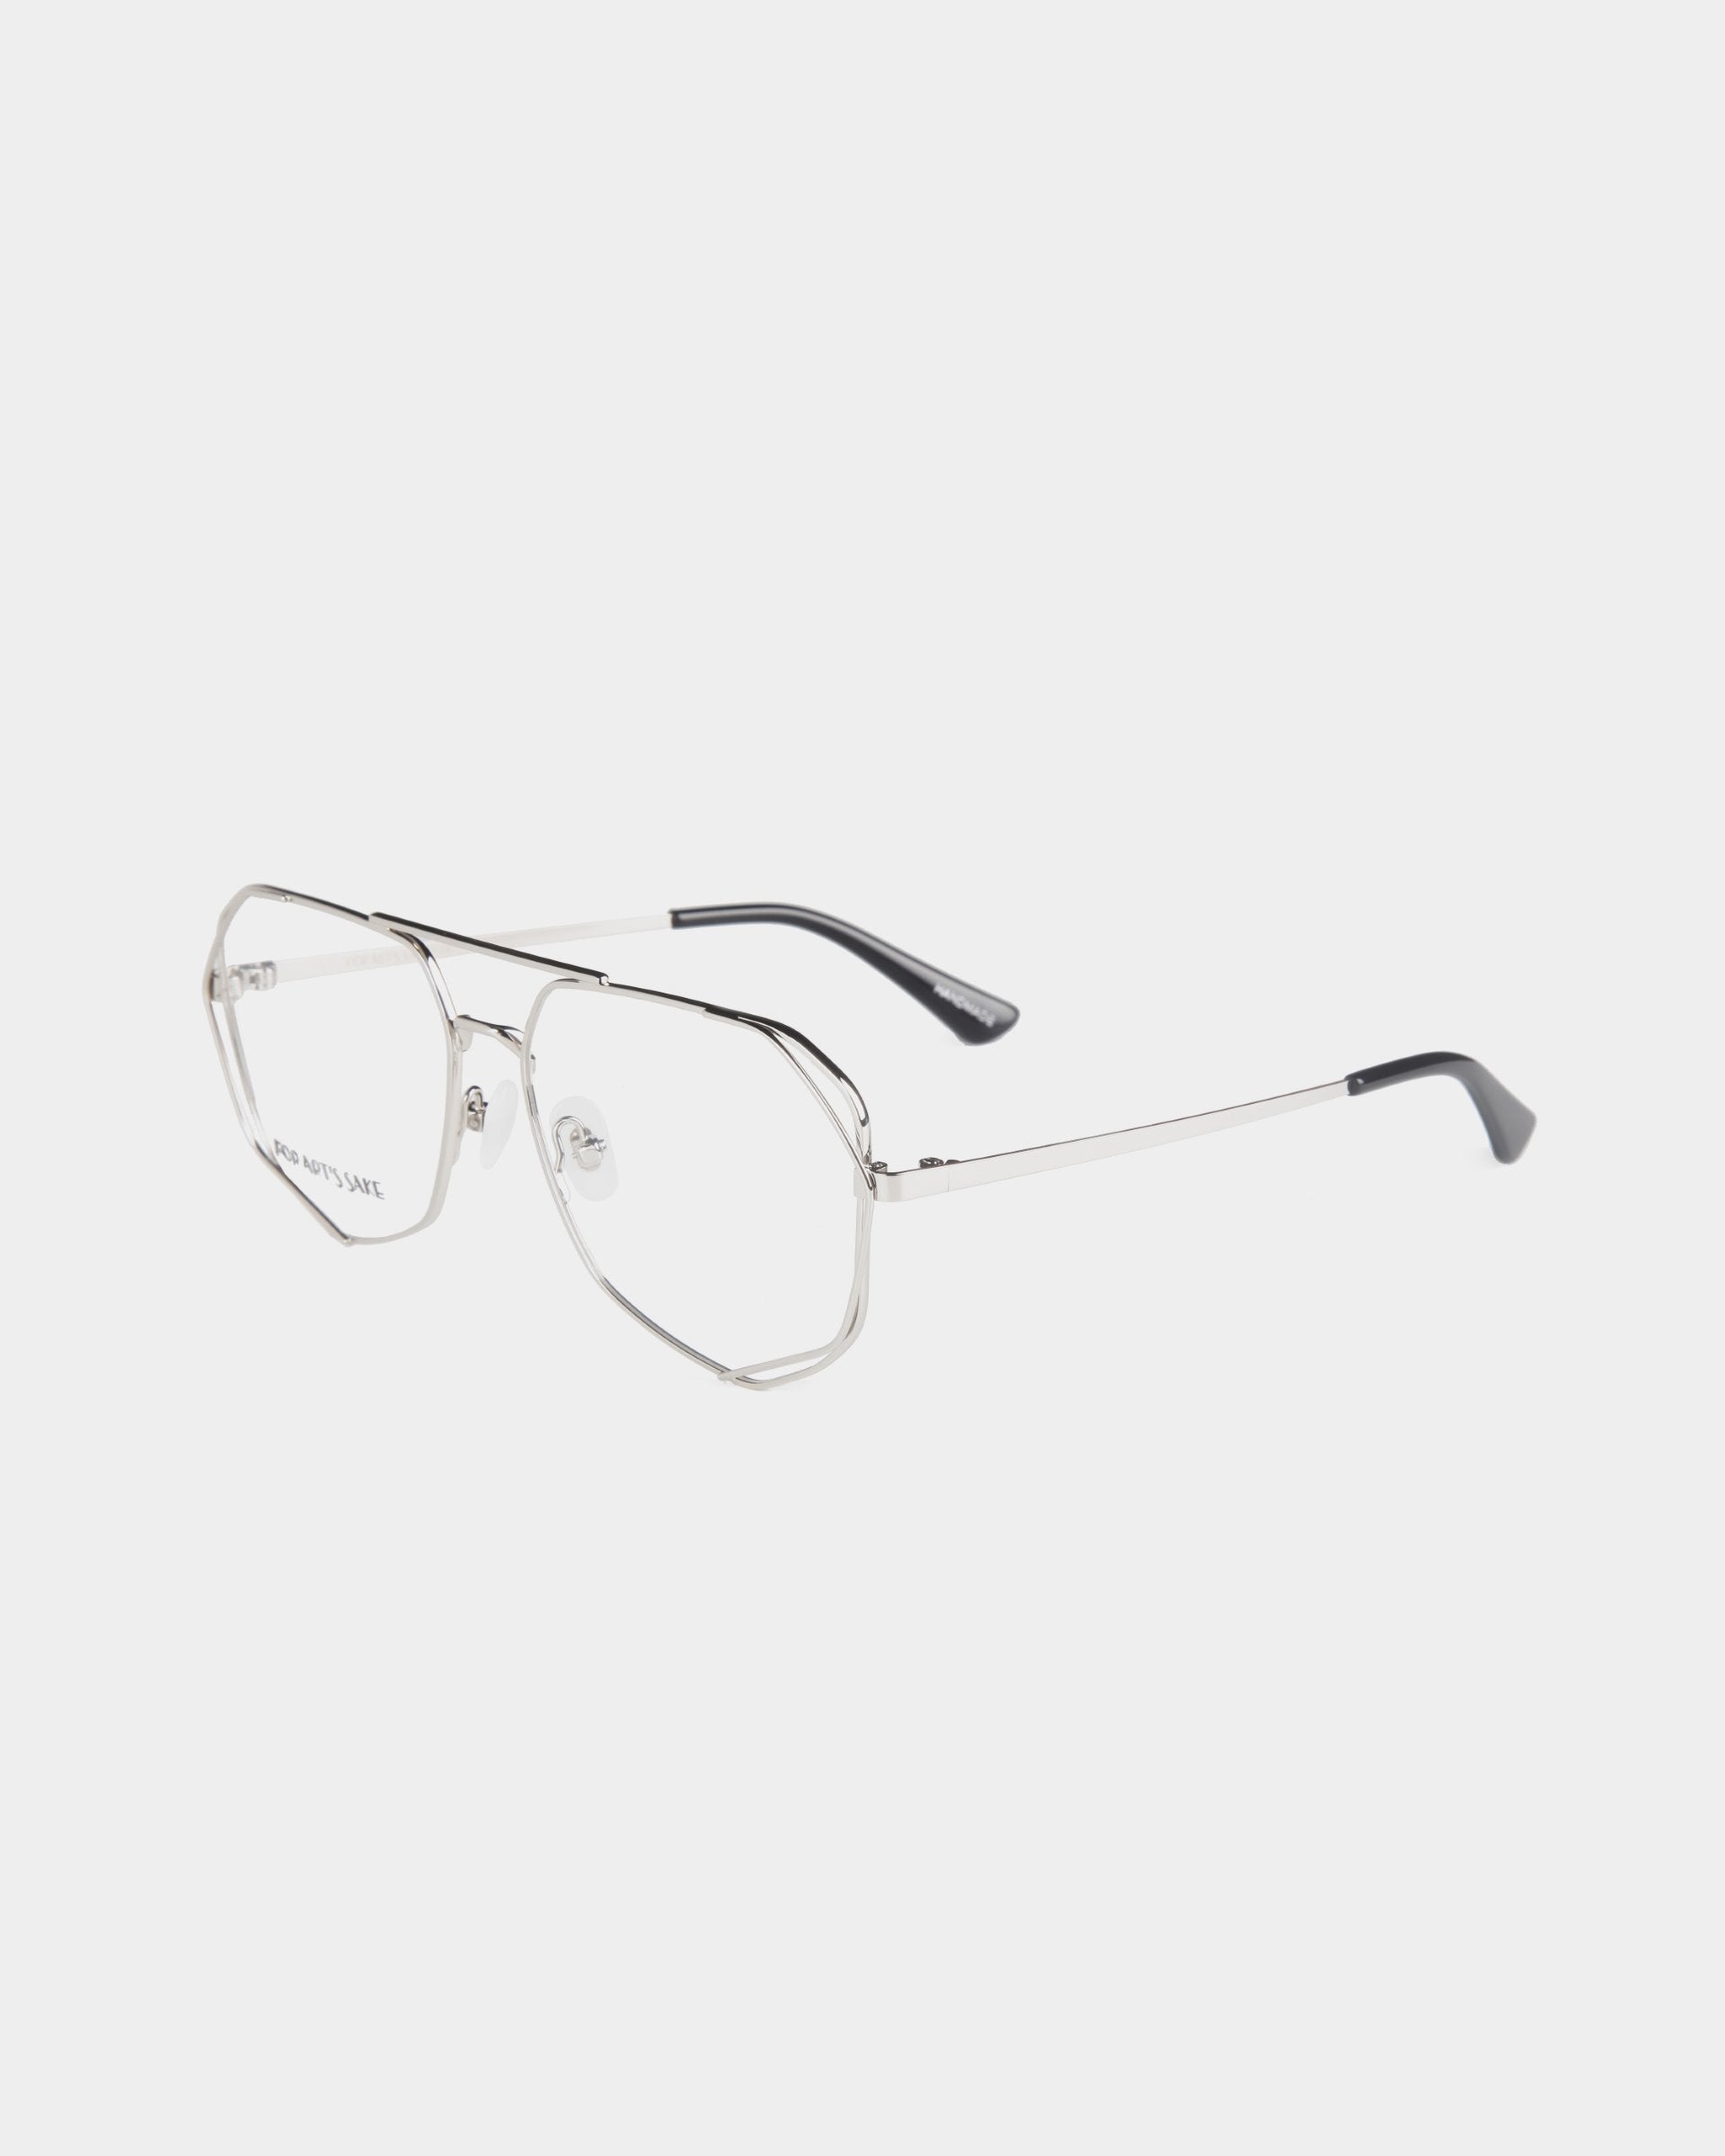 A pair of For Art&#39;s Sake® Genius aviator-style eyeglasses with stainless steel frames, clear lenses, and black temple tips. The design is minimalist and modern. The background is plain white.